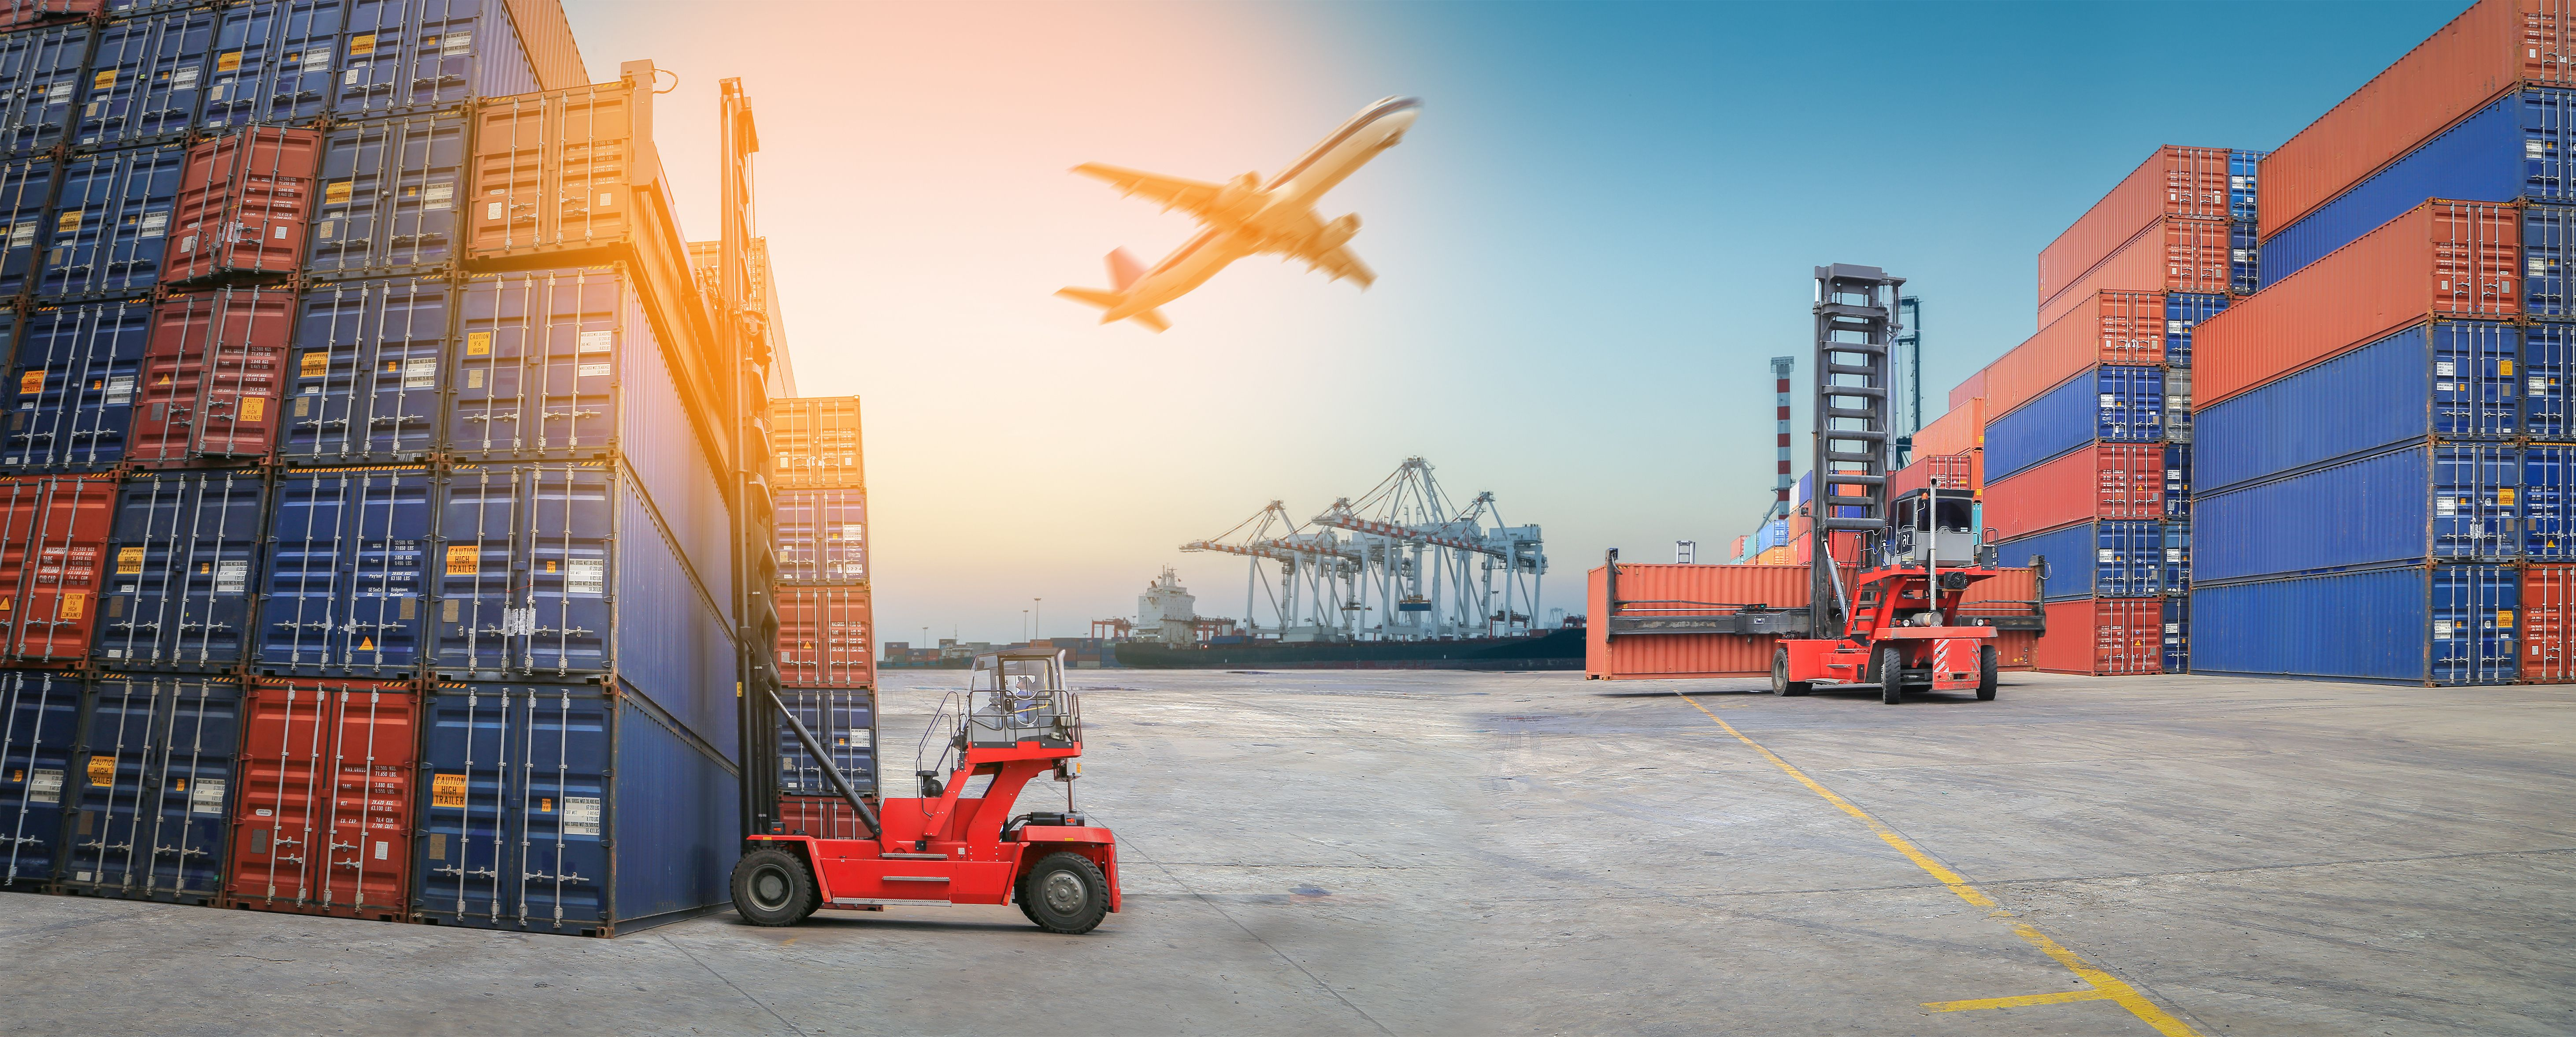 Benefits of Freight Forwarding Management Software